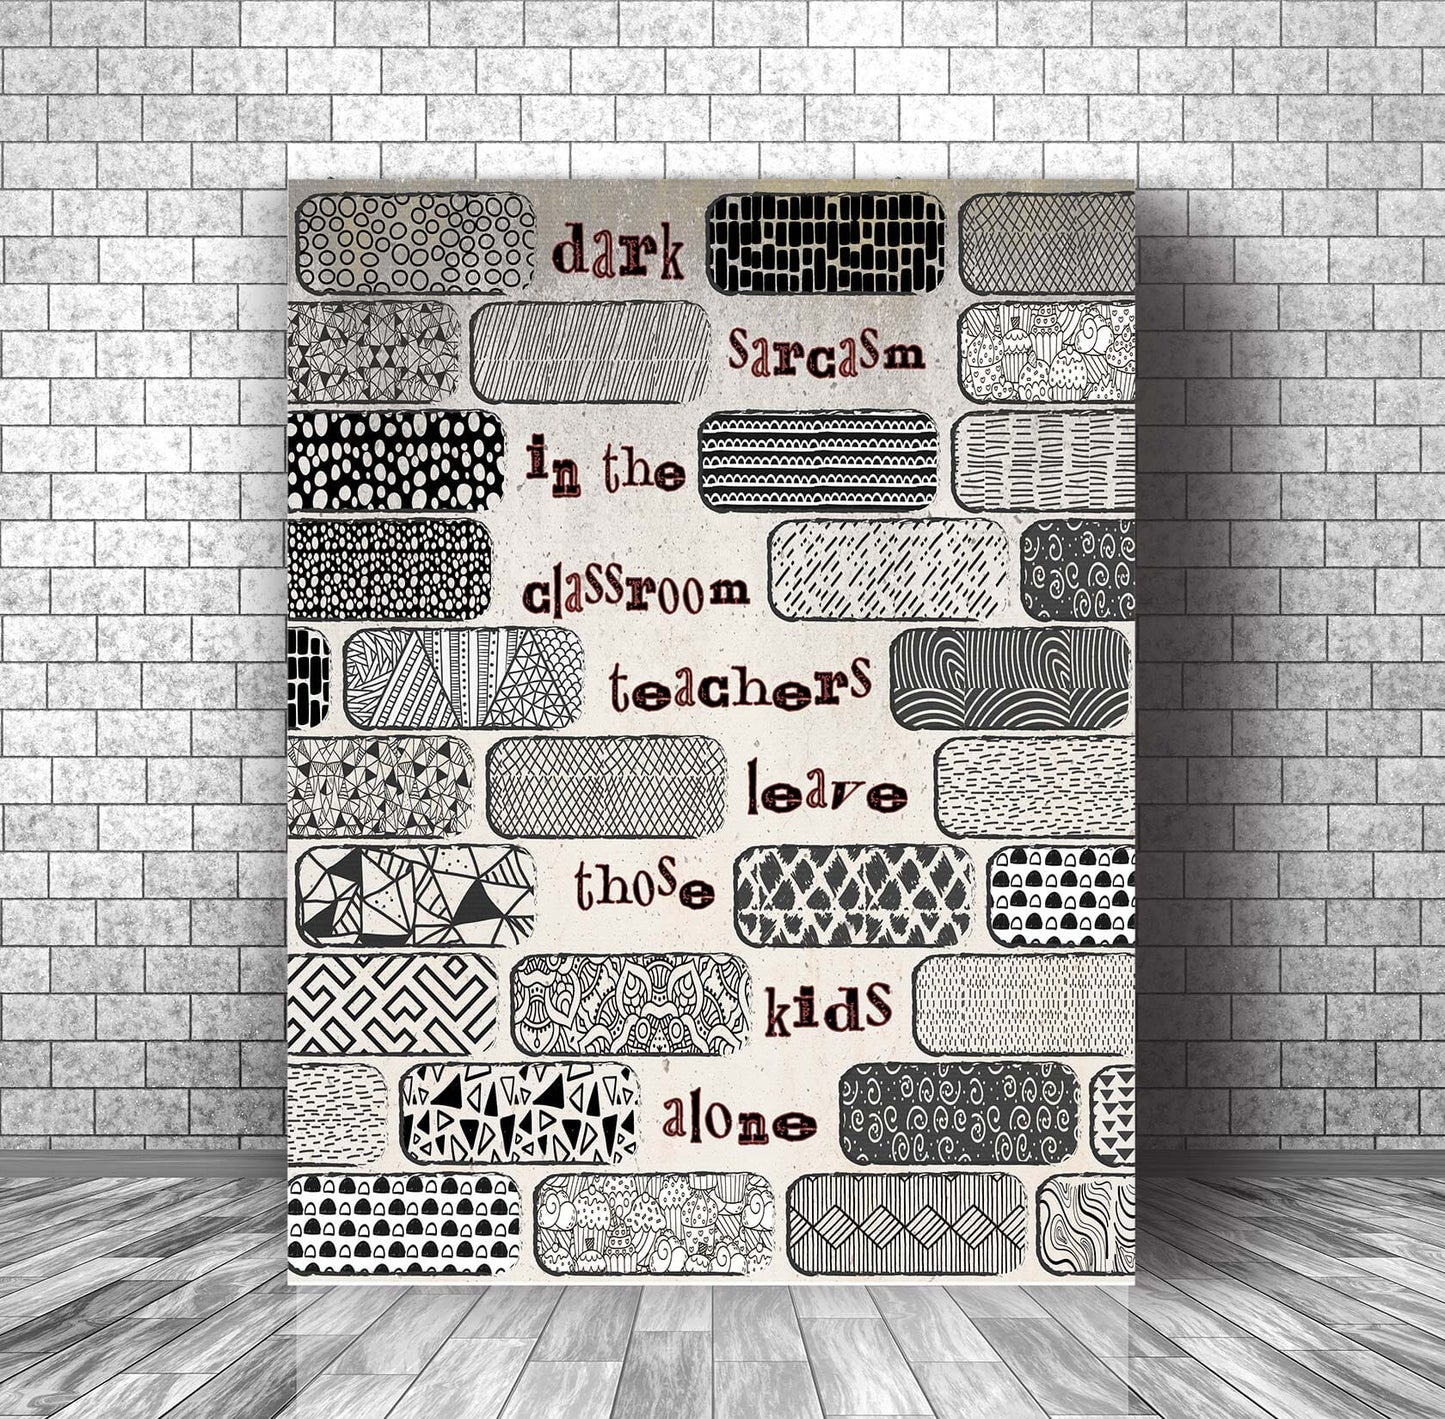 Another Brick in the Wall by Pink Floyd - Song Lyric Poster Song Lyrics Art Song Lyrics Art 11x14 Canvas Wrap 